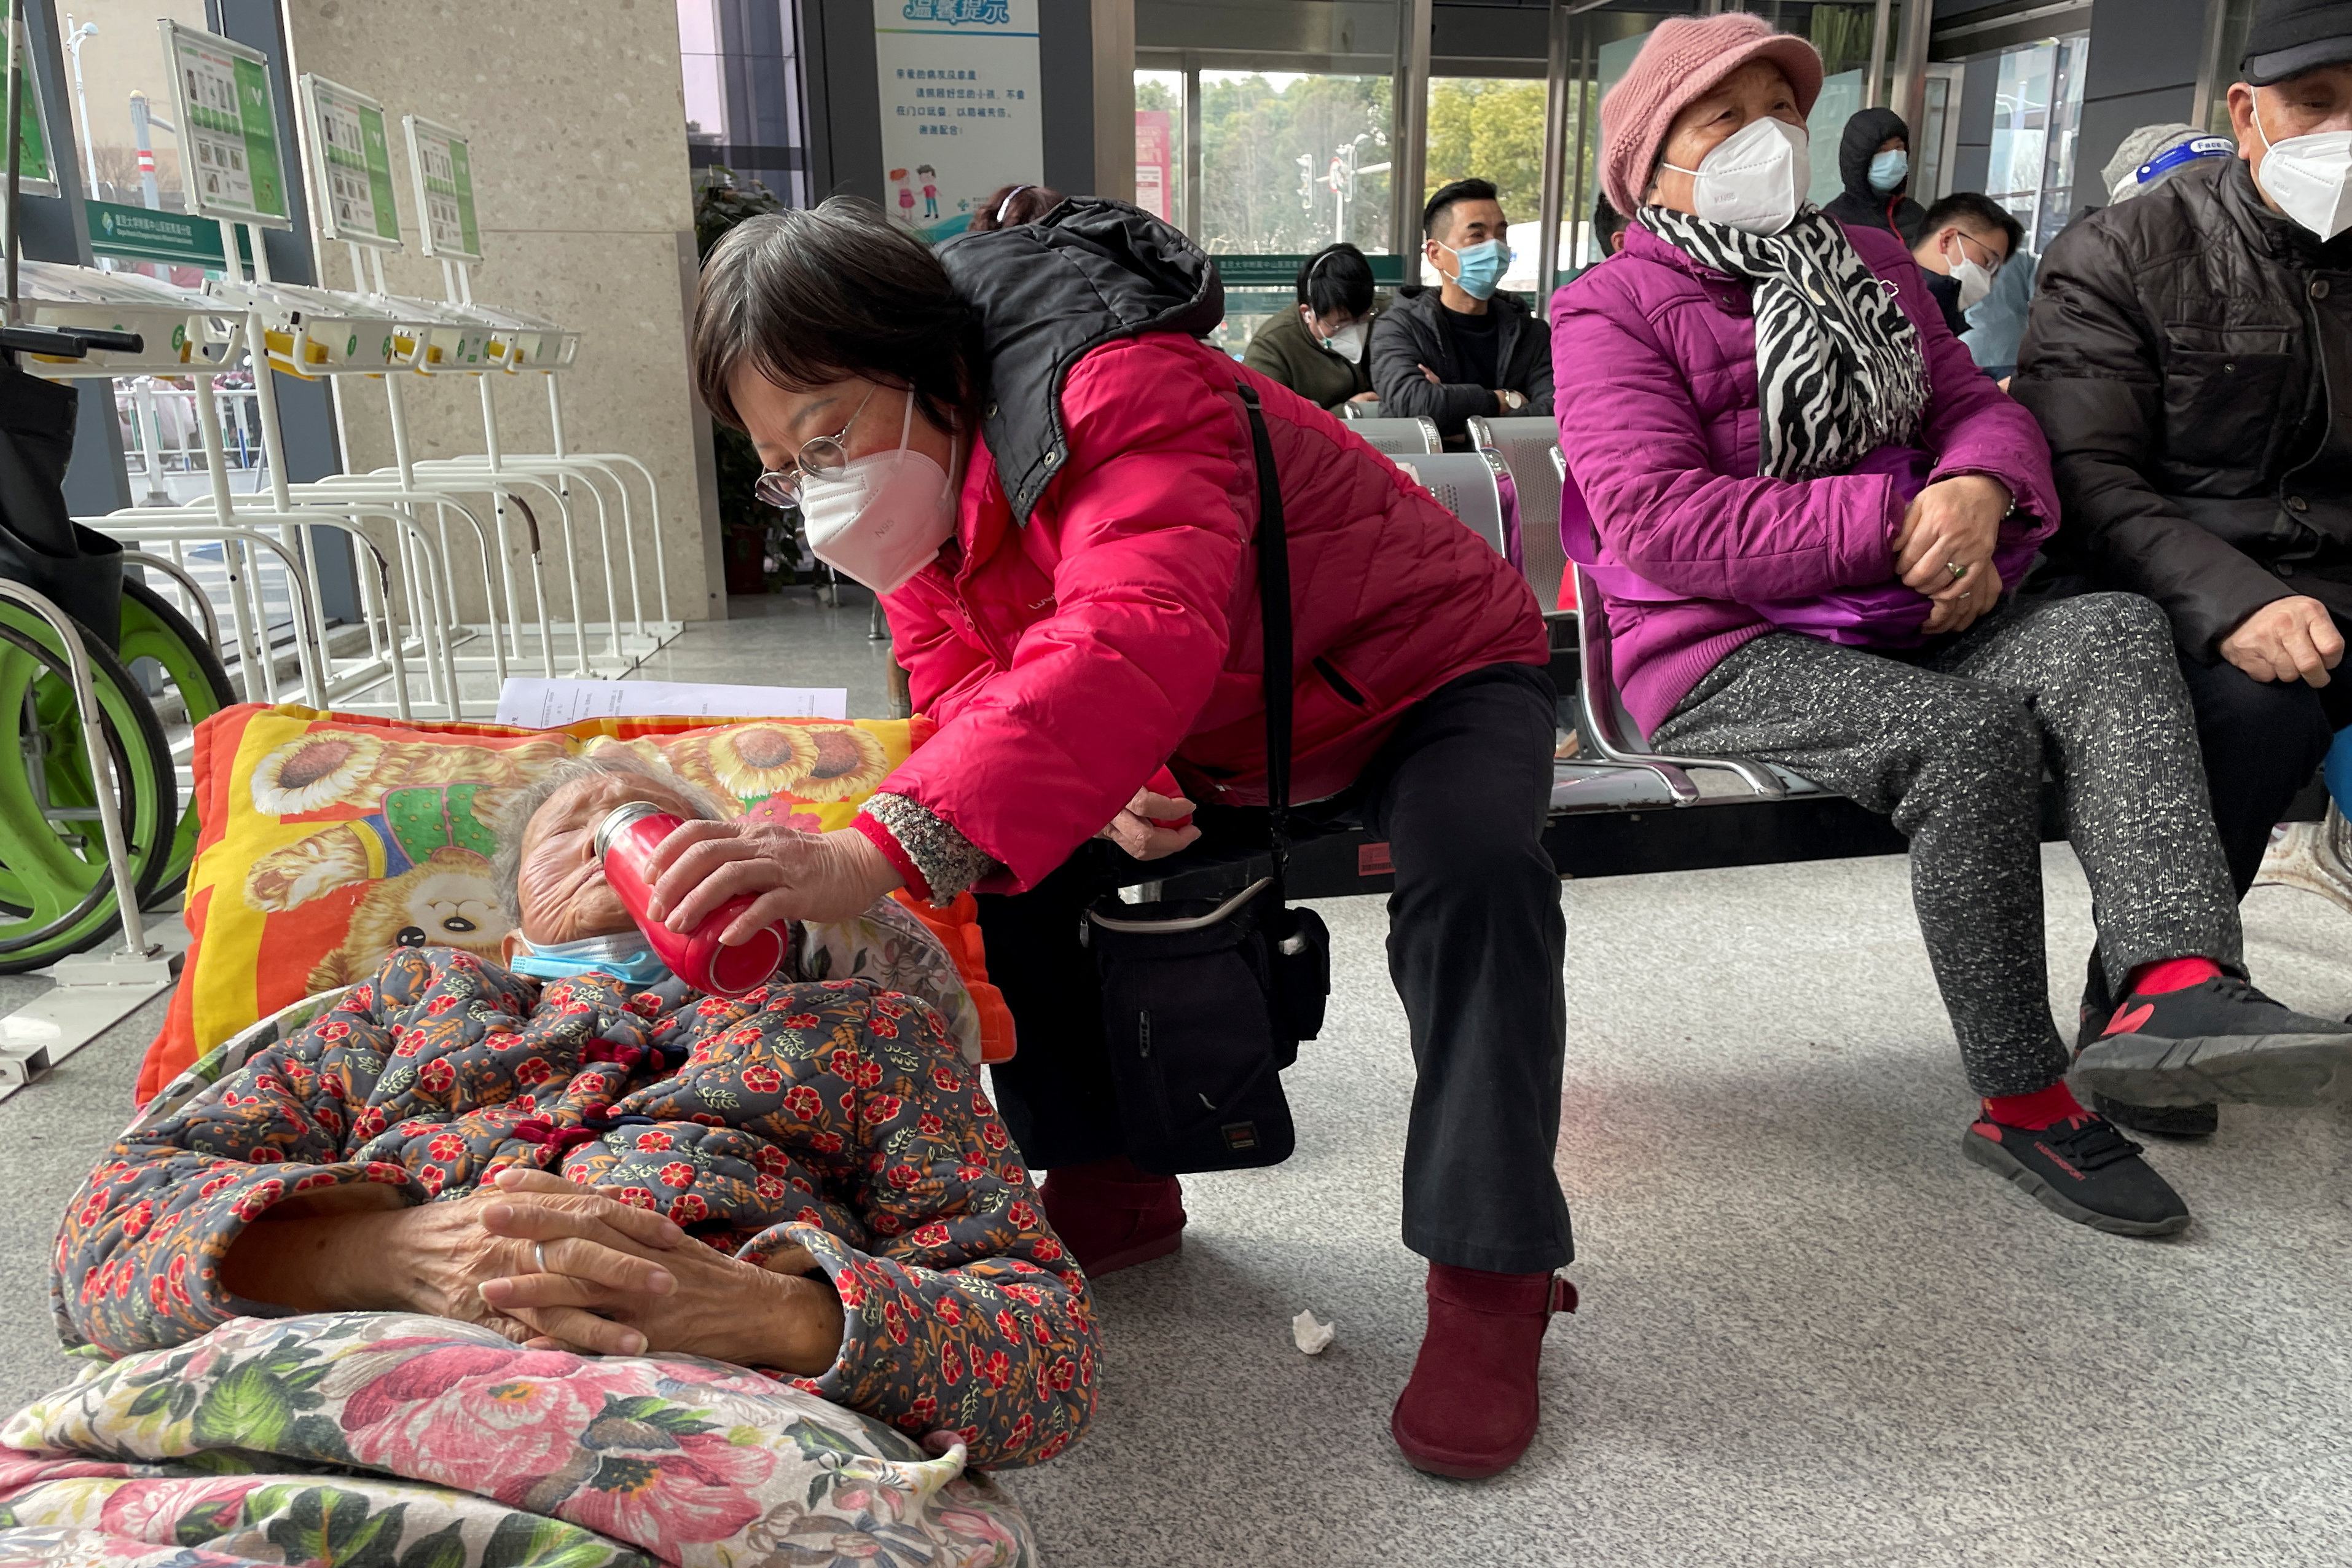 A woman gives a drink to an elderly man lying on a stretcher as he waits in a hospital emergency department, amid the coronavirus disease (COVID-19) outbreak in China.